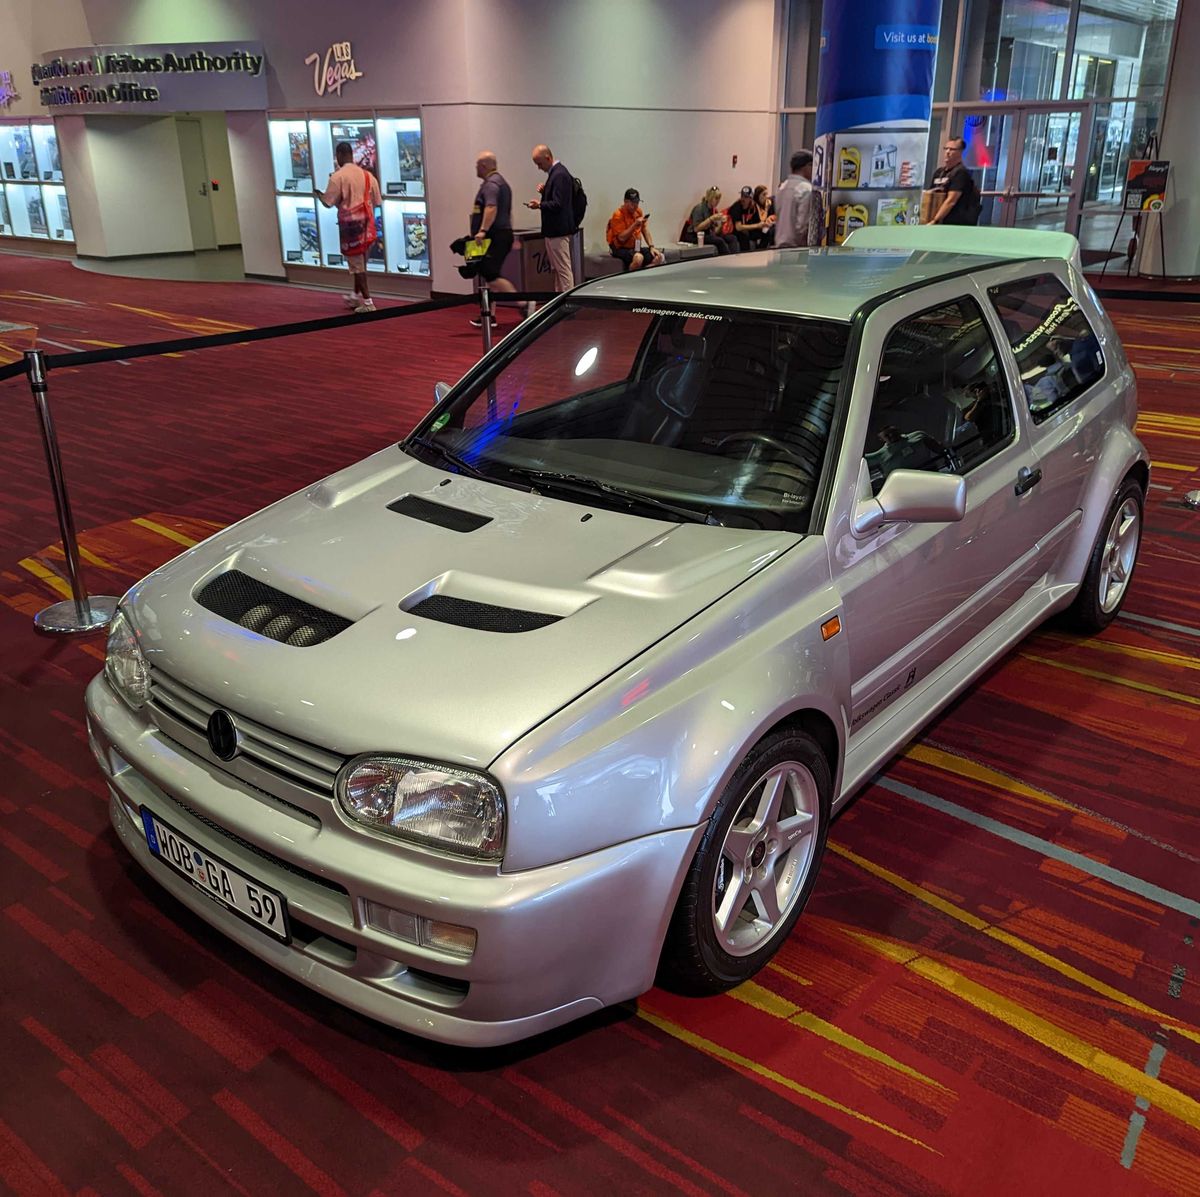 VW Brought This Obscure Golf Rally Prototype to SEMA, and It's Awesome